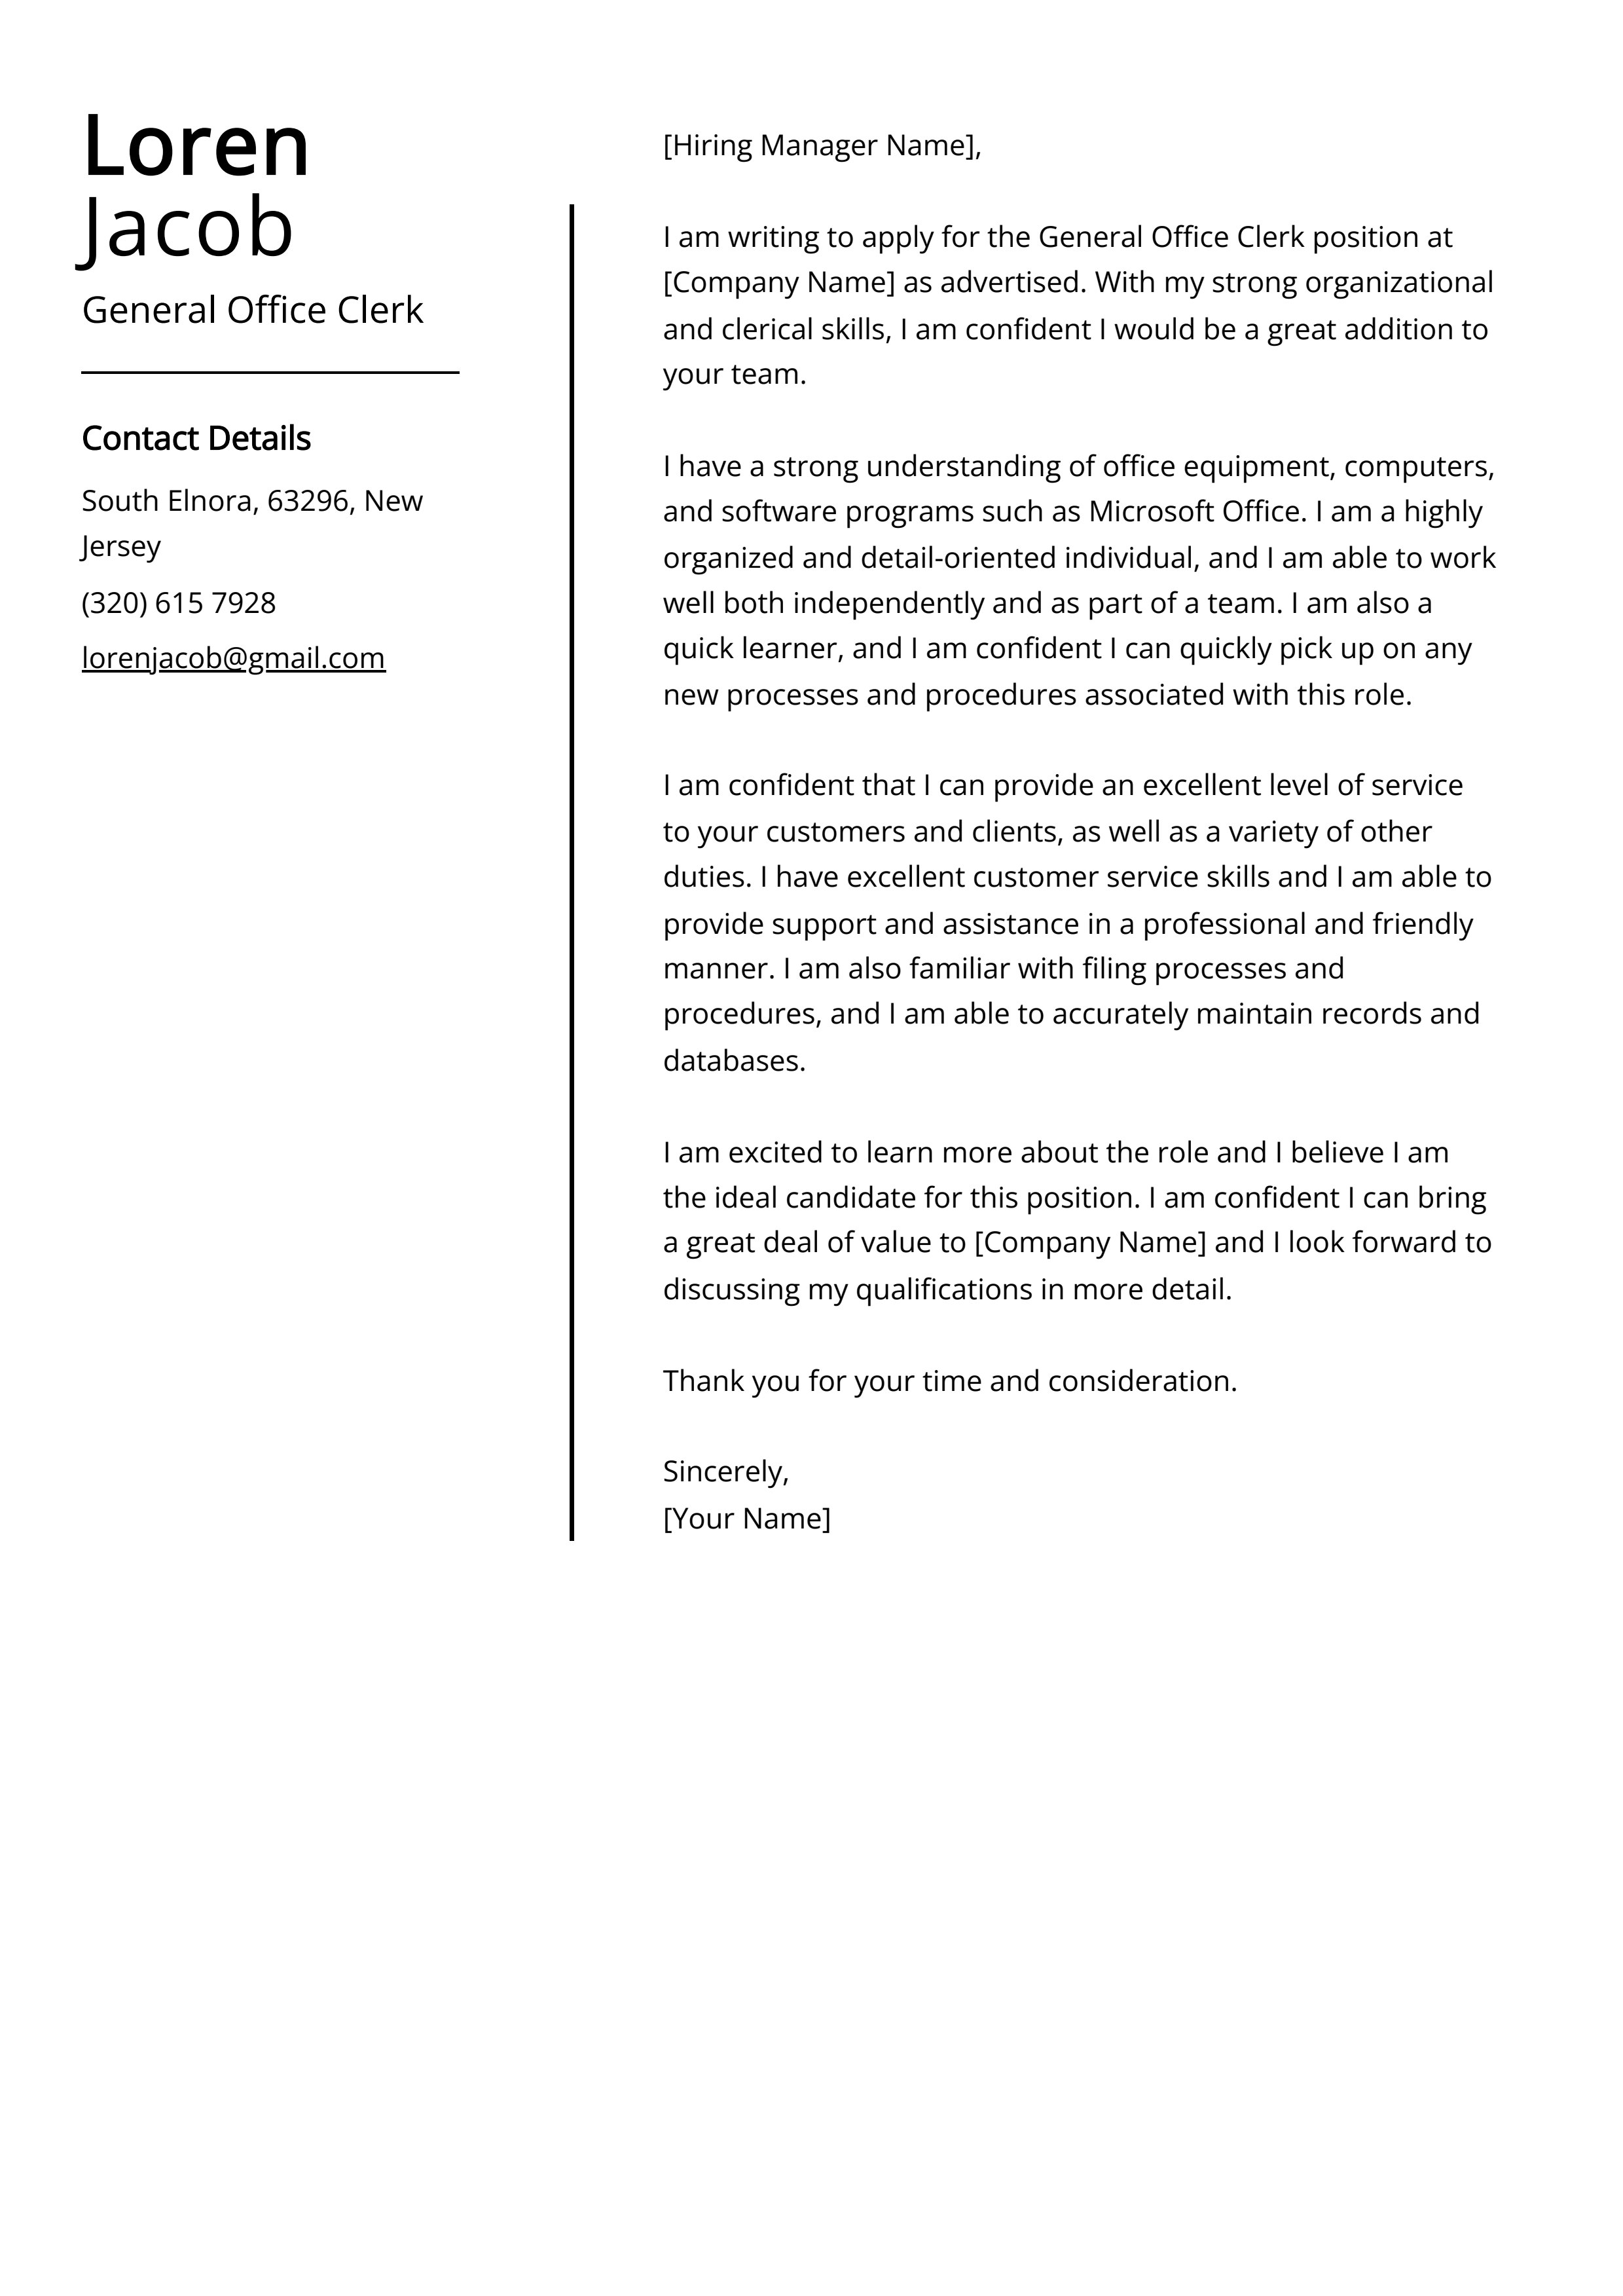 General Office Clerk Cover Letter Example